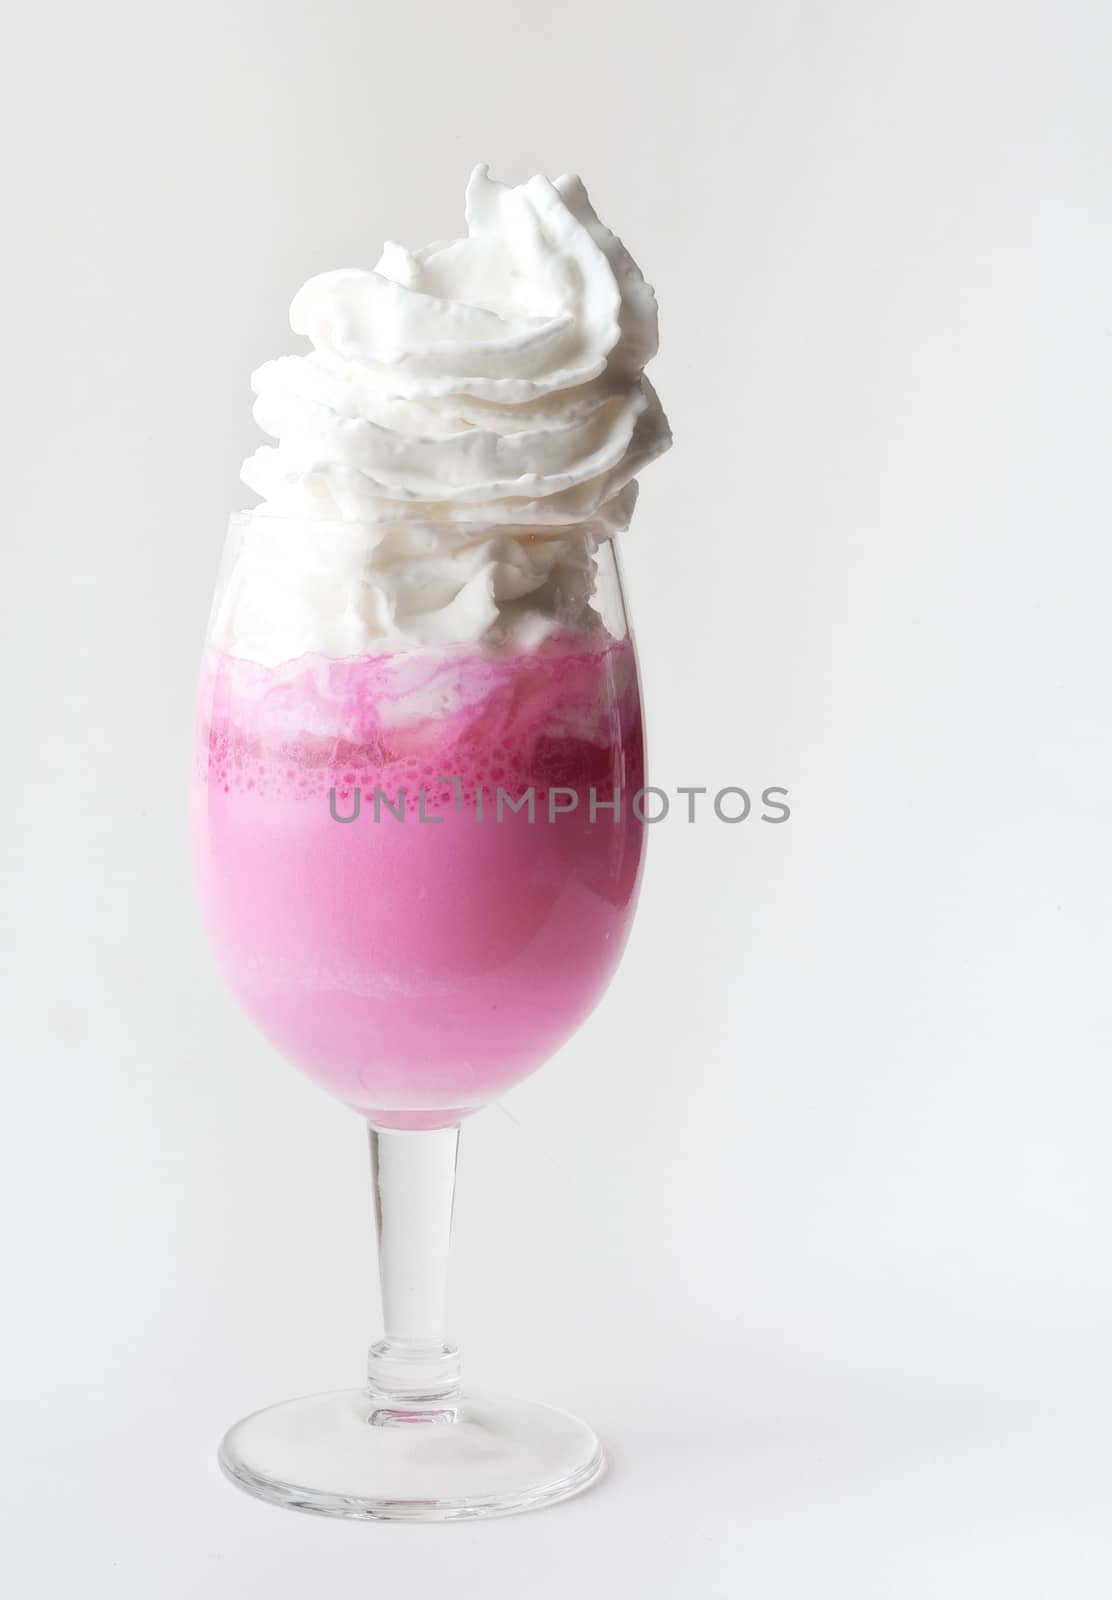 A pink, frothy drink in a glass with whipped cream topping and isolated white background